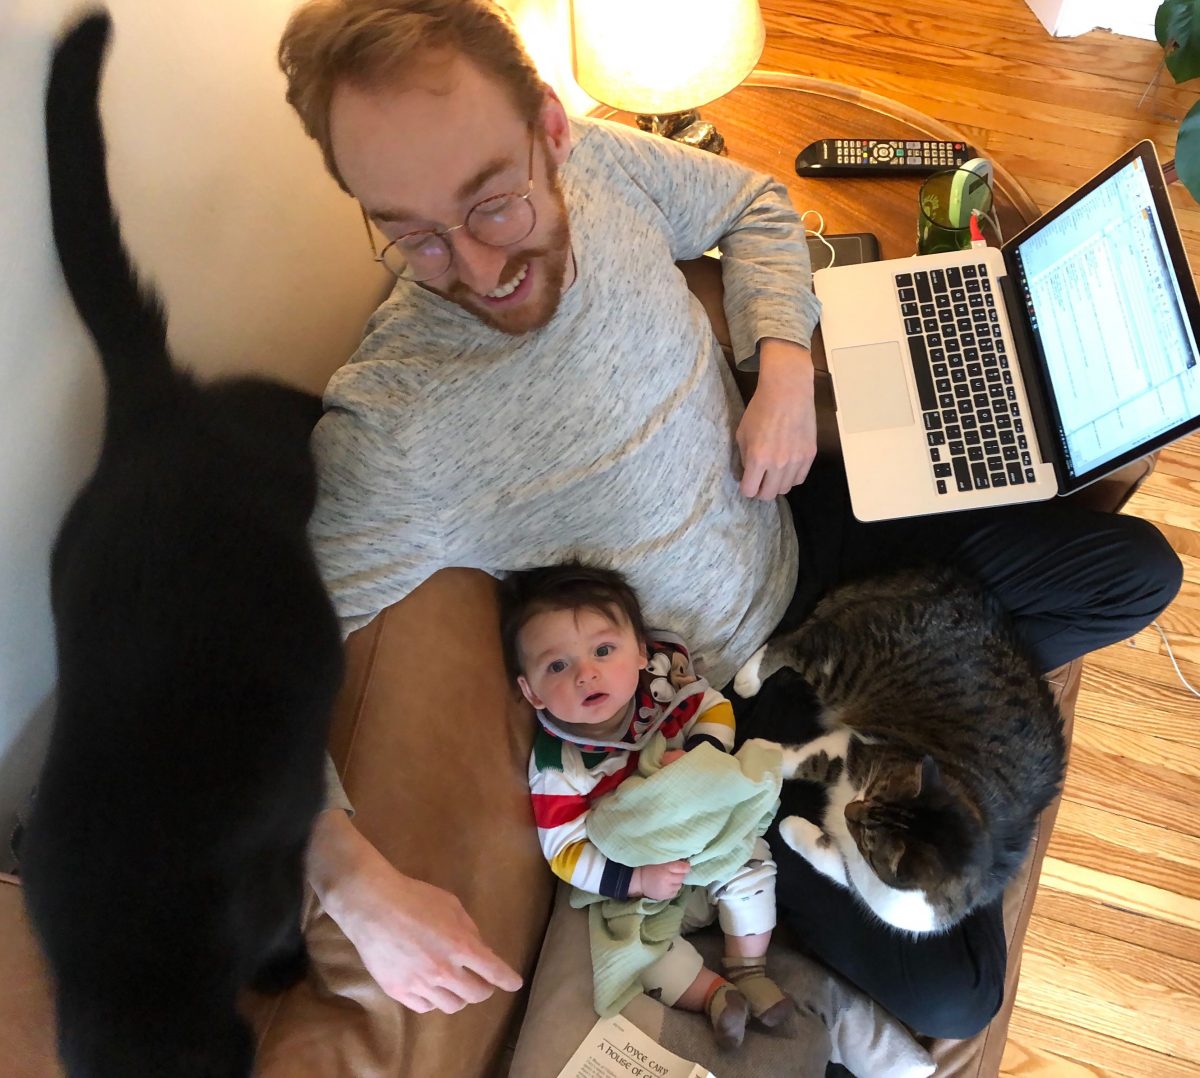 Fraser sits on the couch with his laptop, his one year old son and two cats.